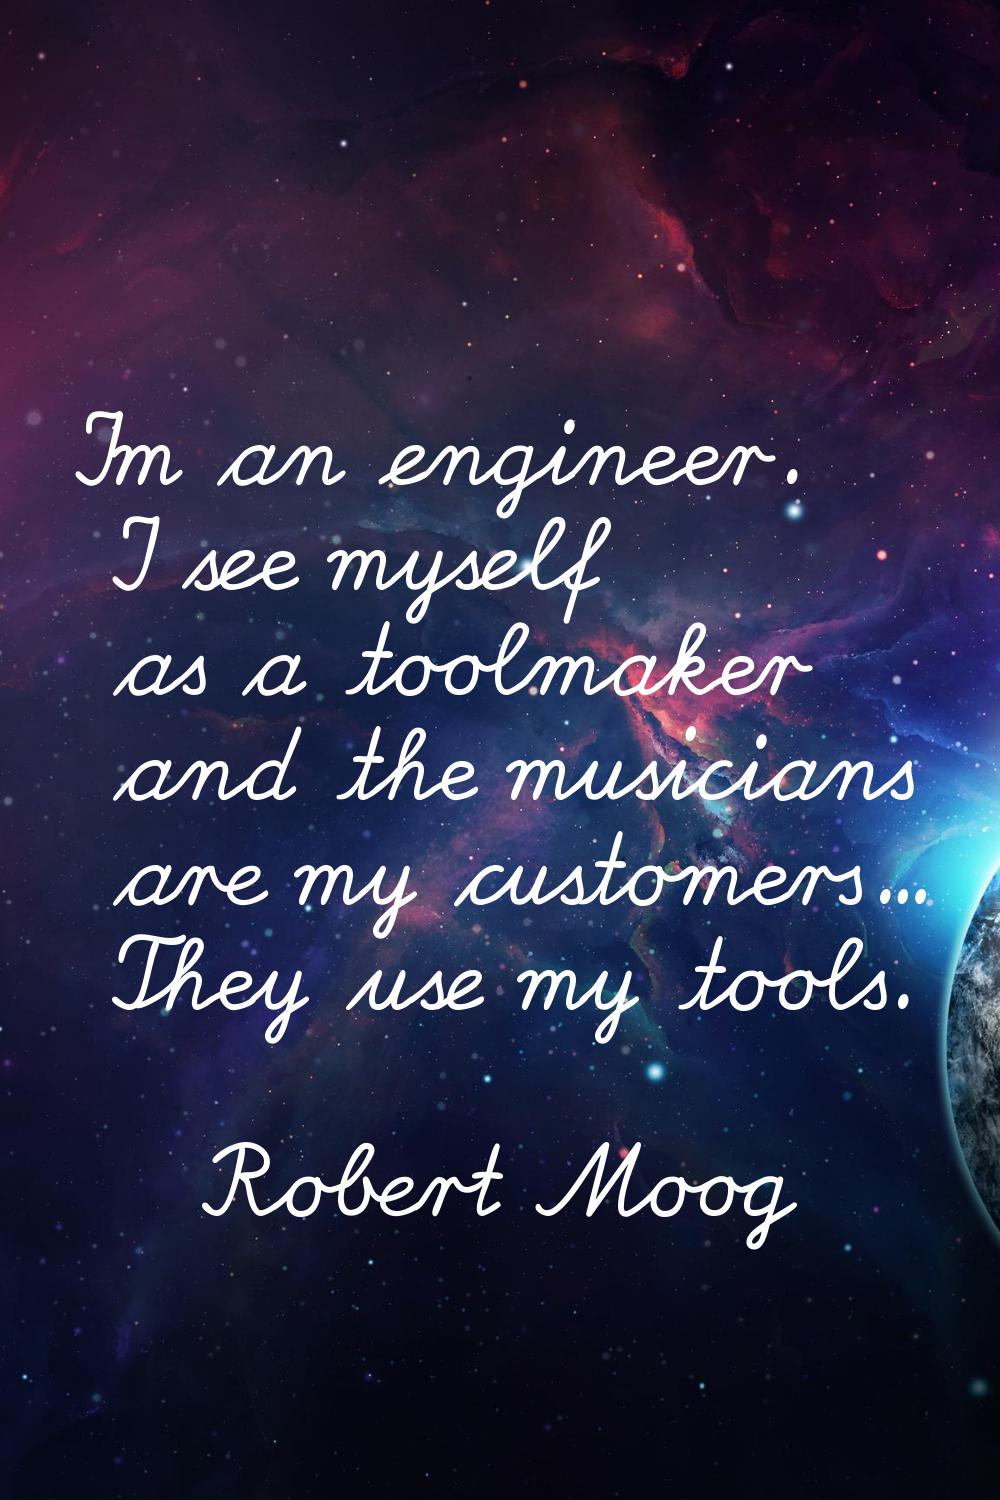 I'm an engineer. I see myself as a toolmaker and the musicians are my customers... They use my tool